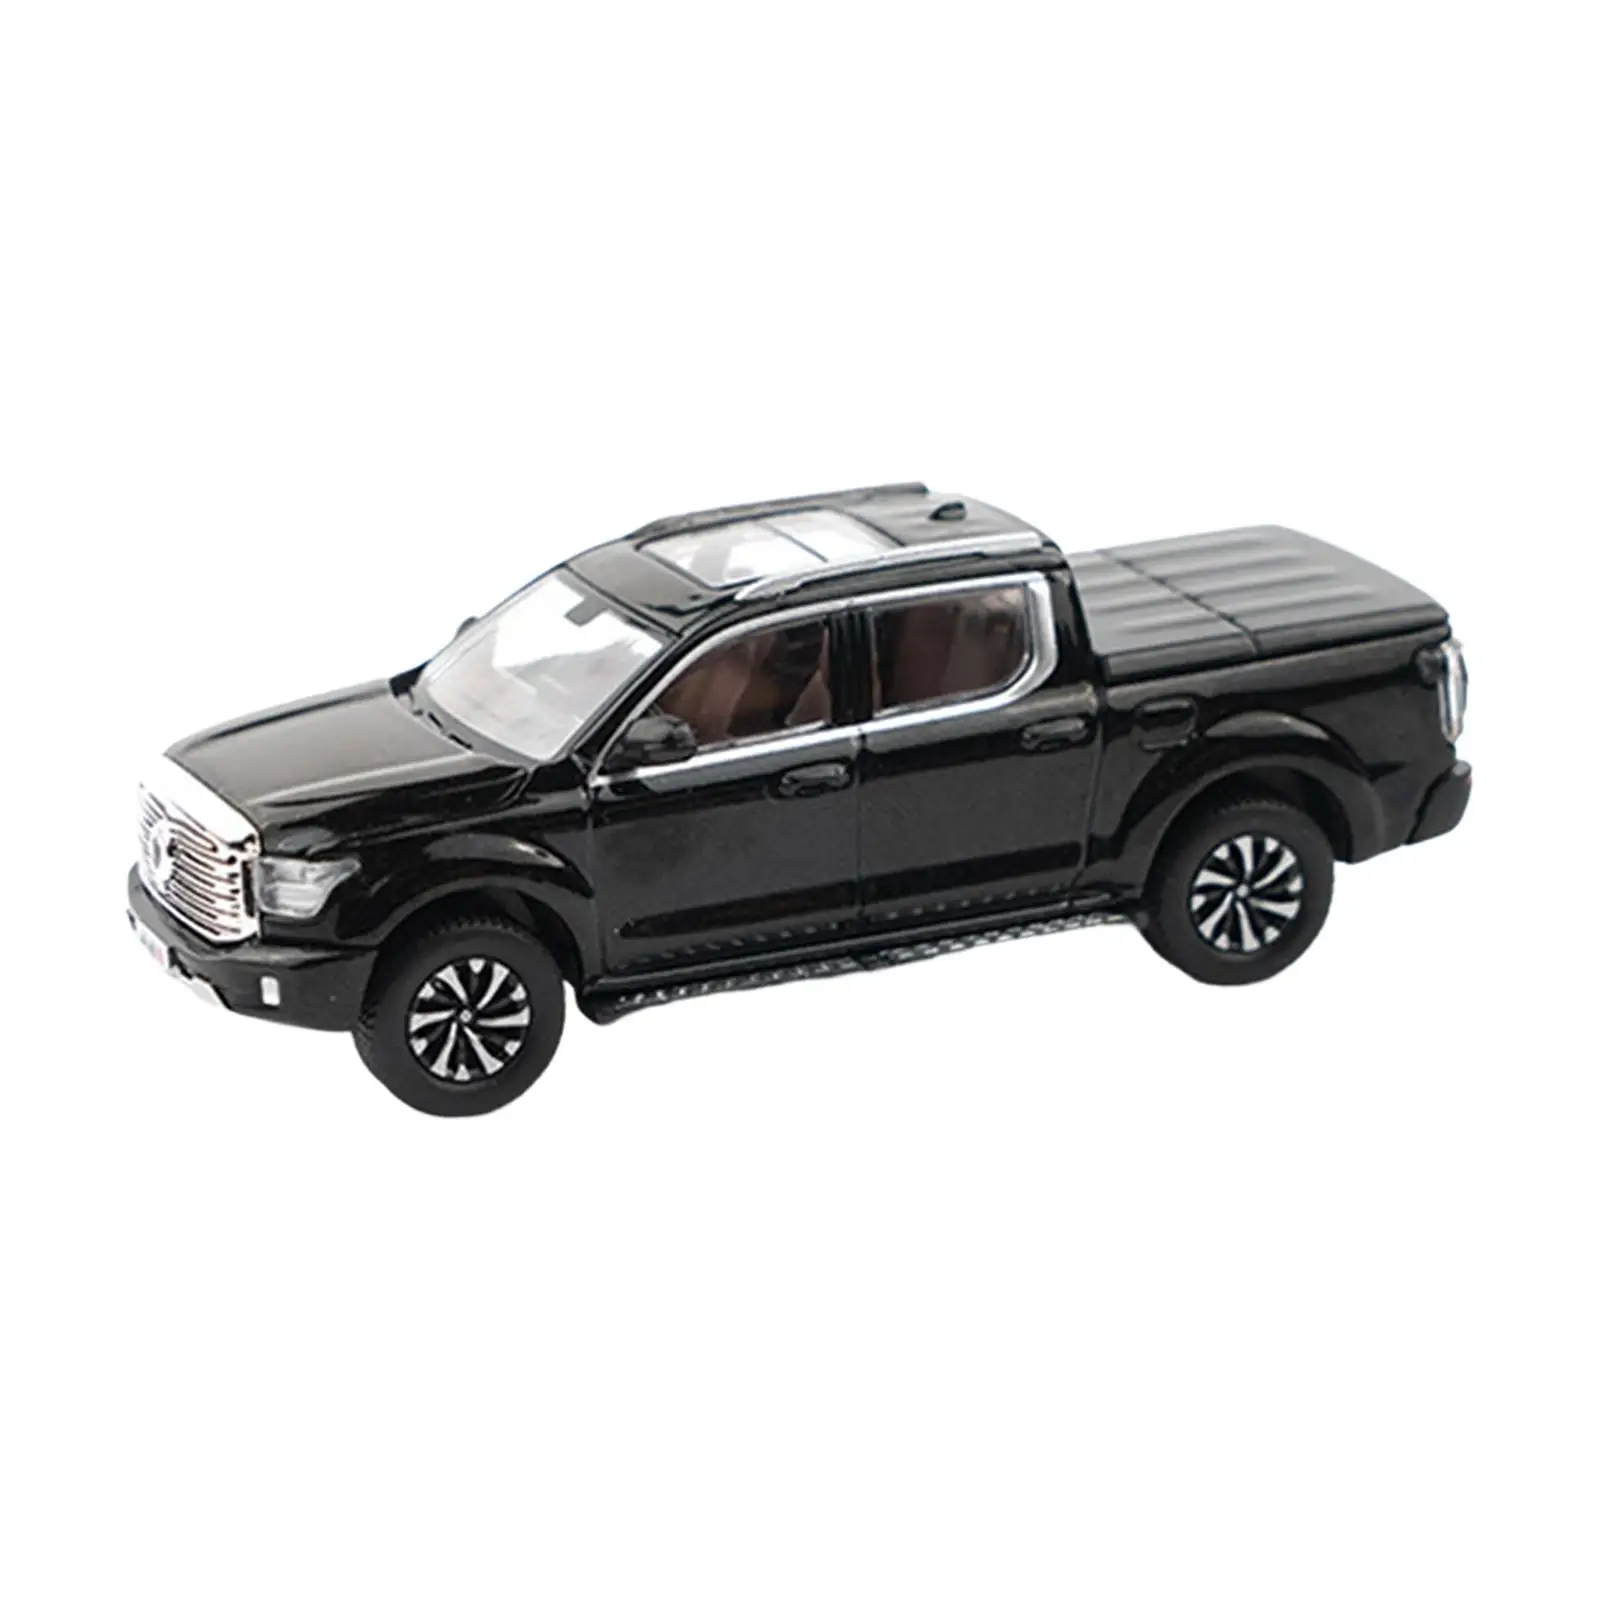 Alloy Diecast Car Model 1/64 Model Car for Furnishings Home Decoration Gift